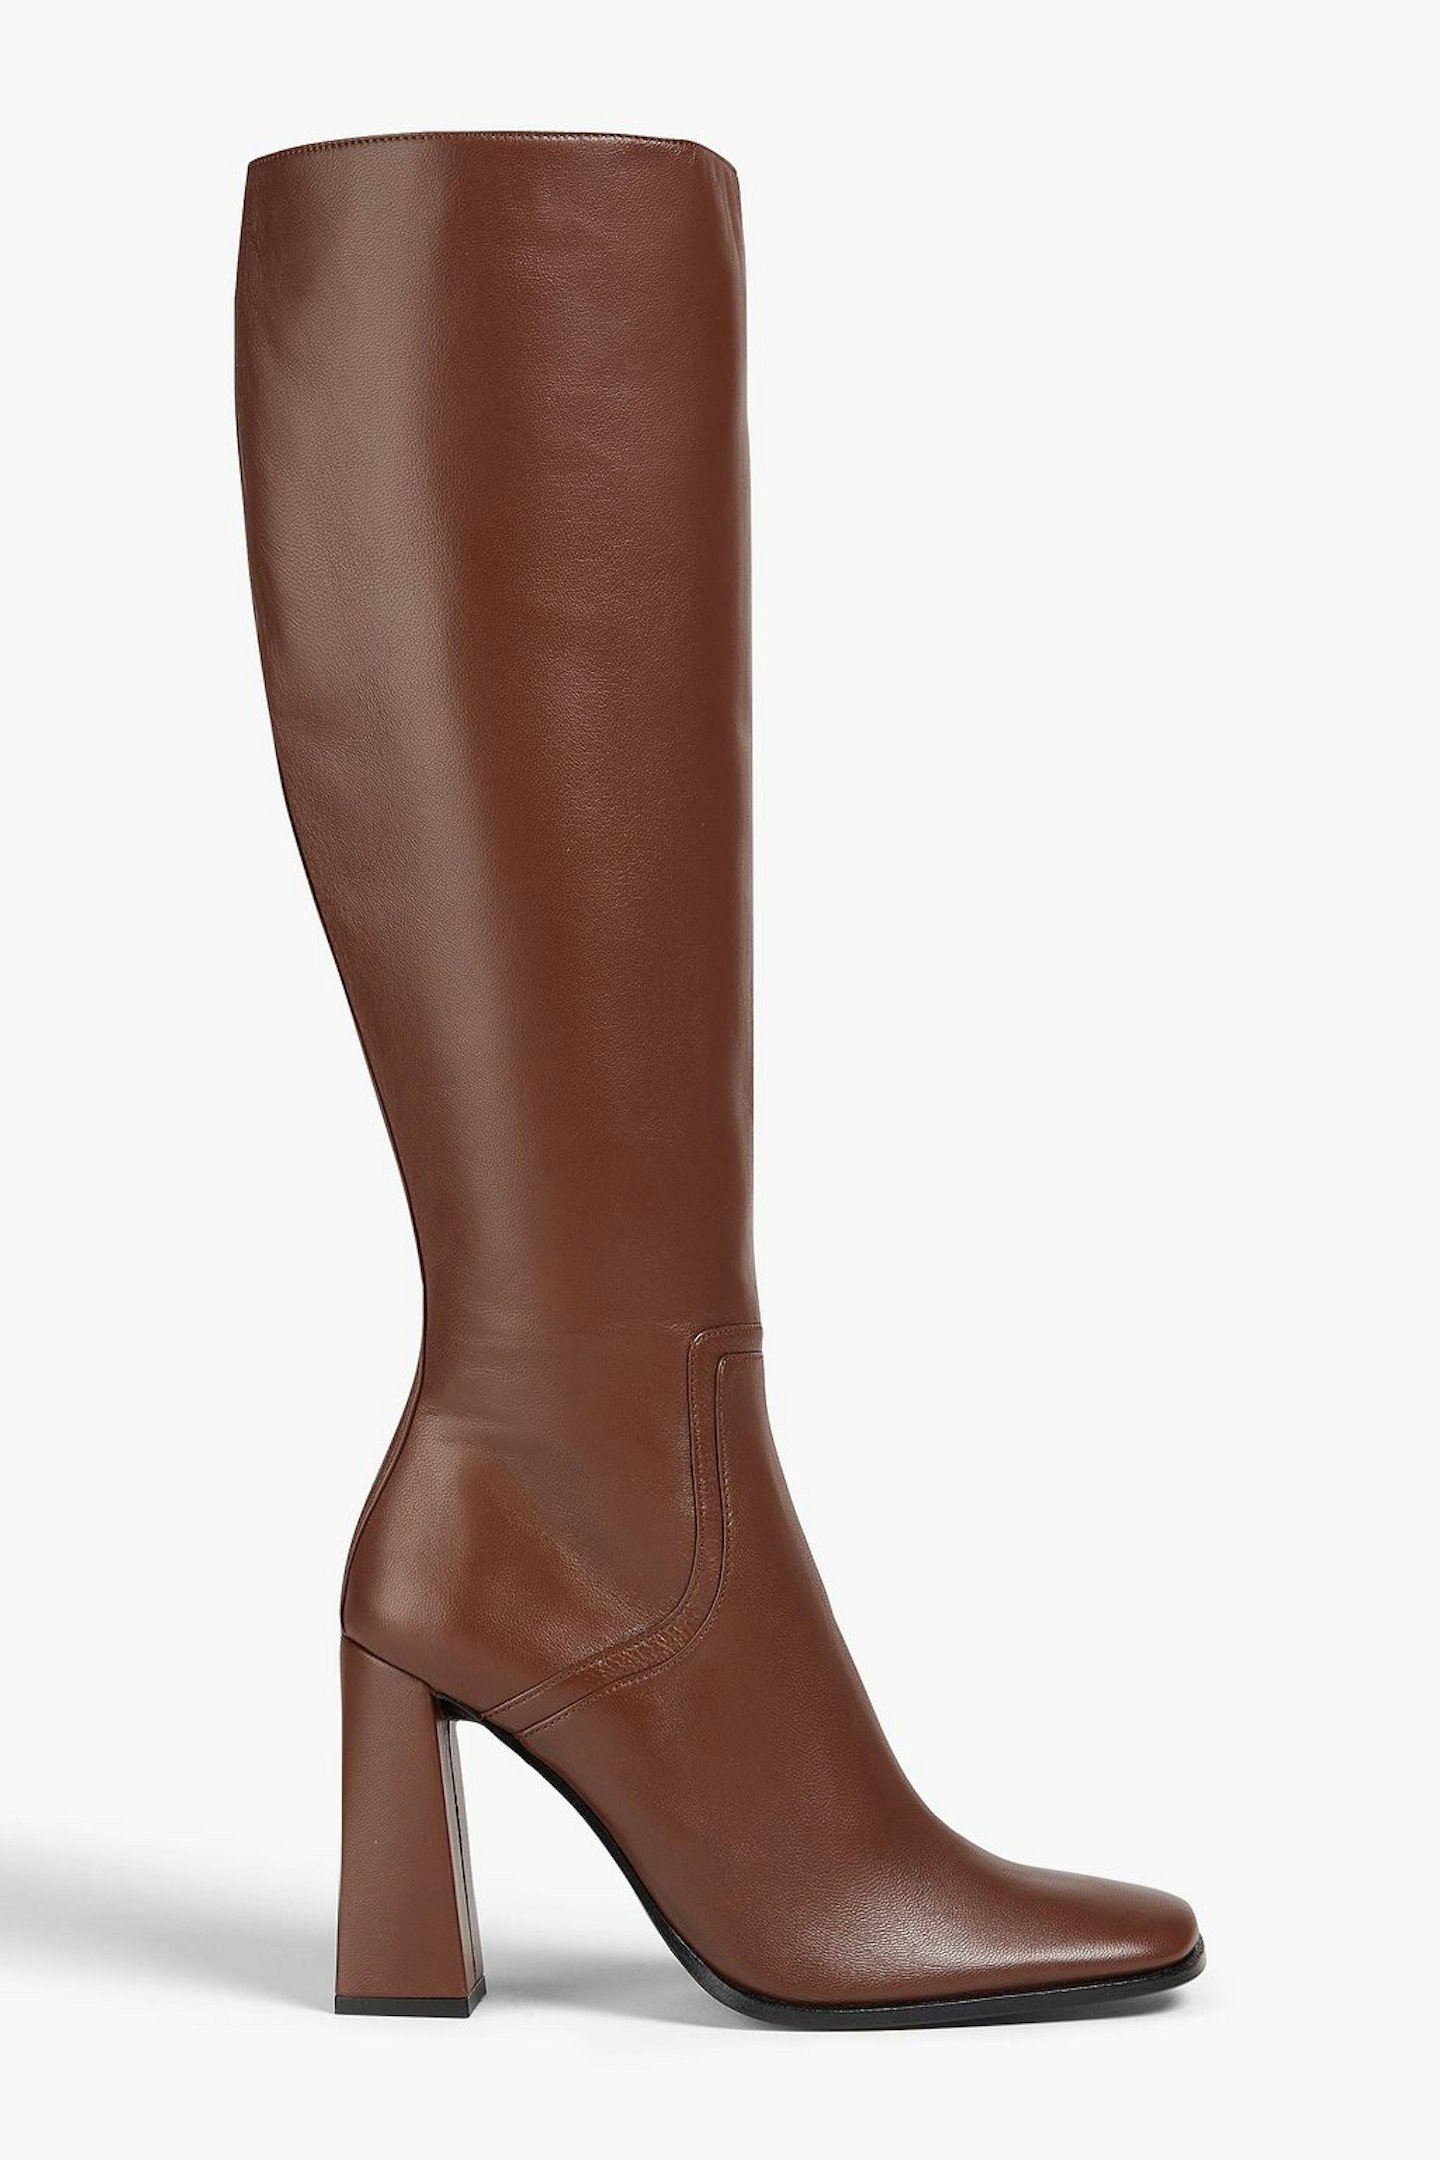 Our Favourite Knee High Boot Outfits Right Now